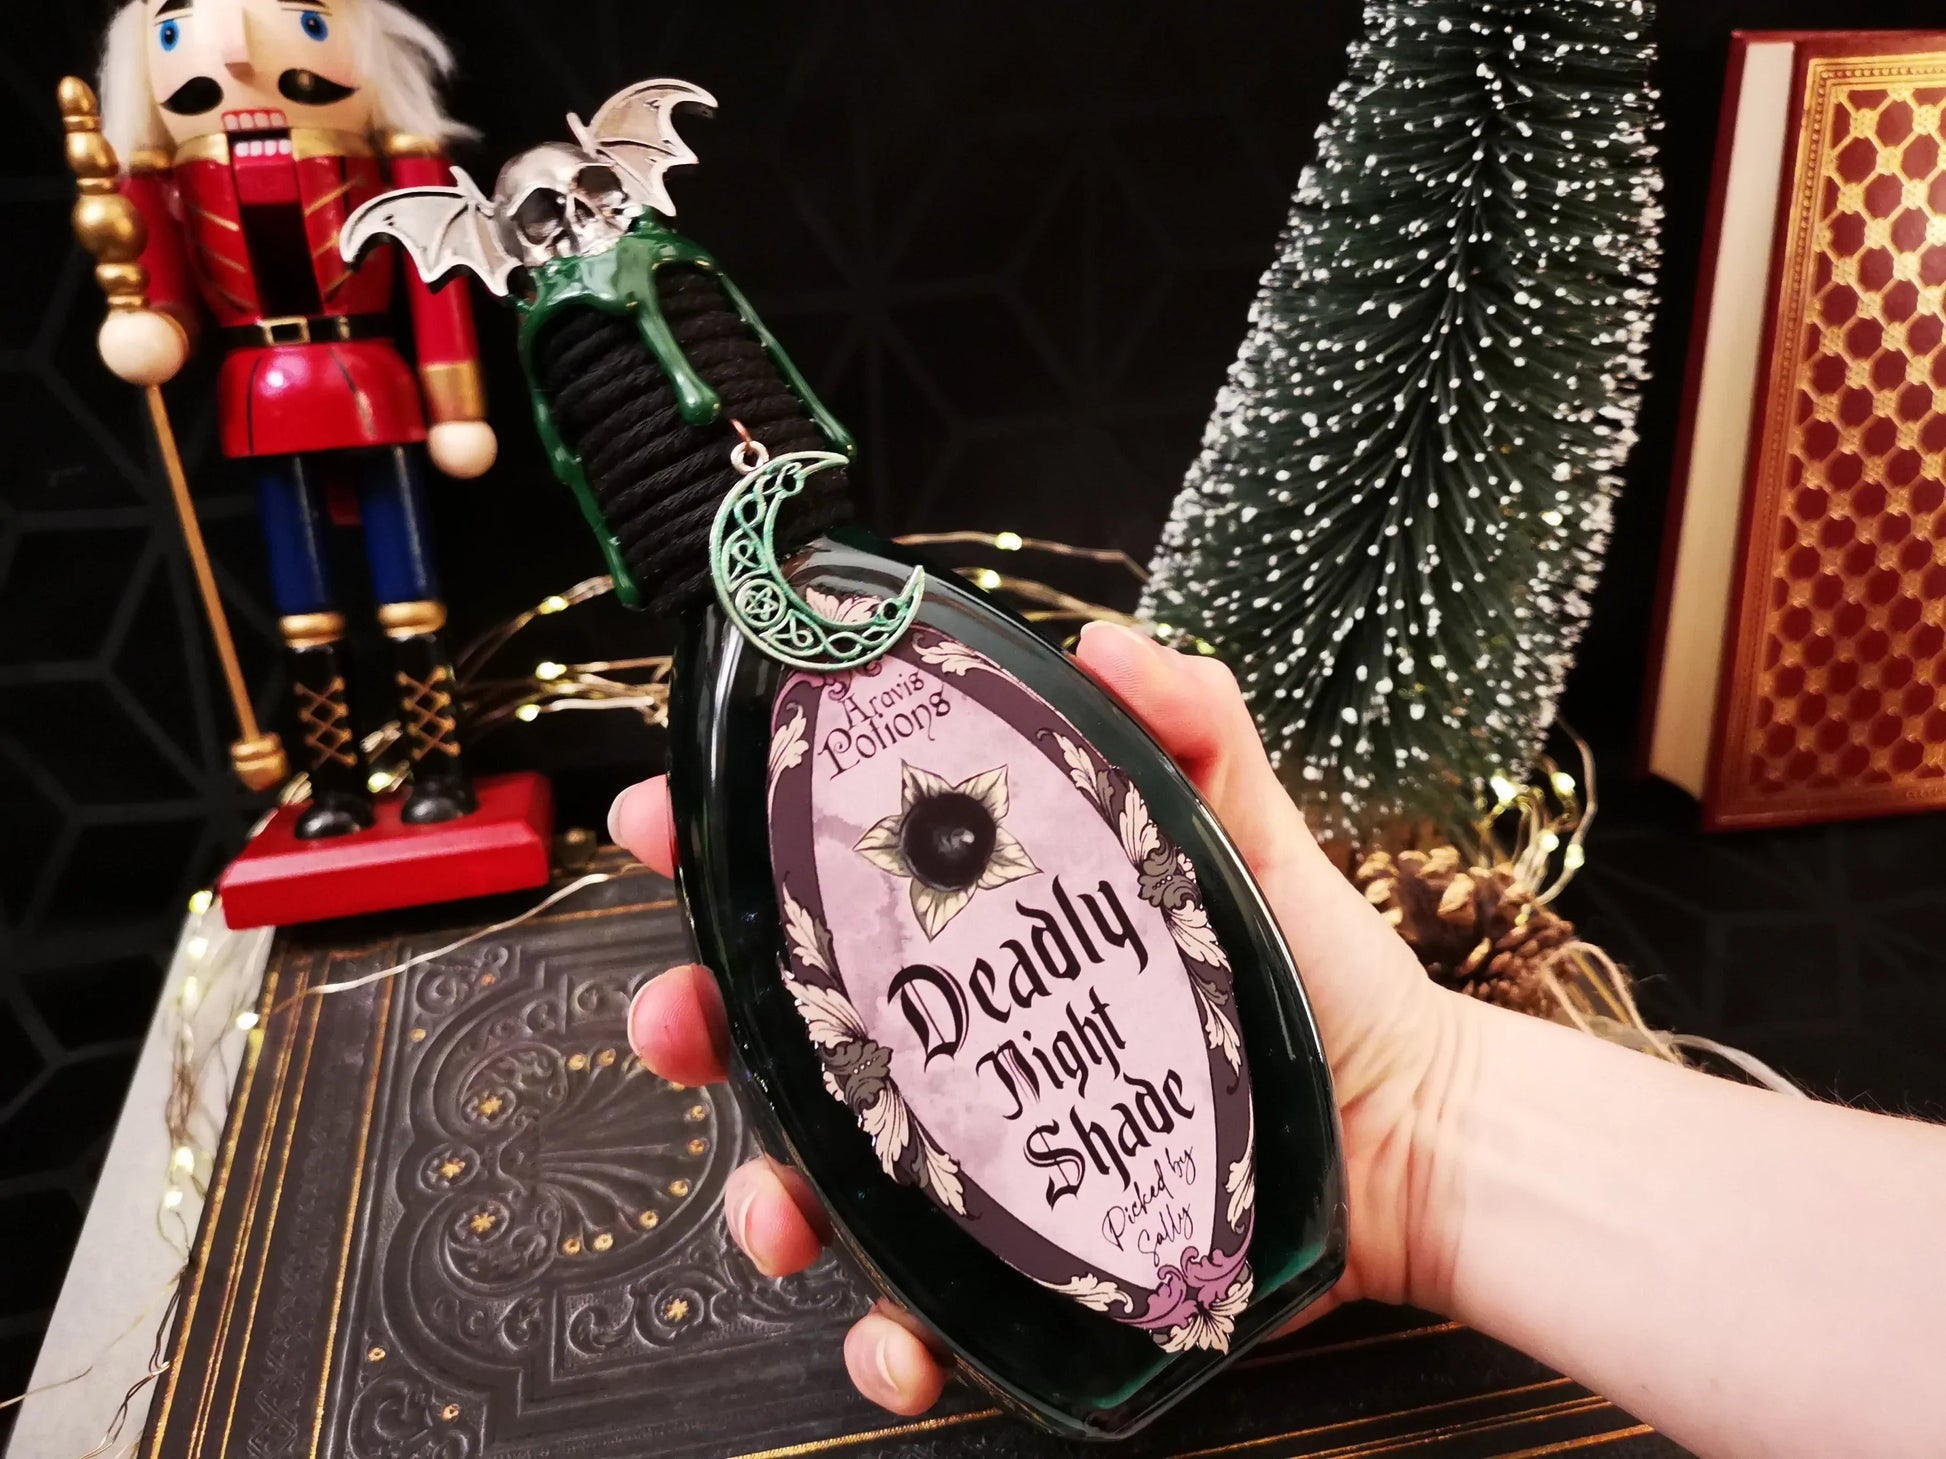 Deadly Night Shade (Nocturnaline/Belladonne) Aravis Potions Apothecary Harry Potter